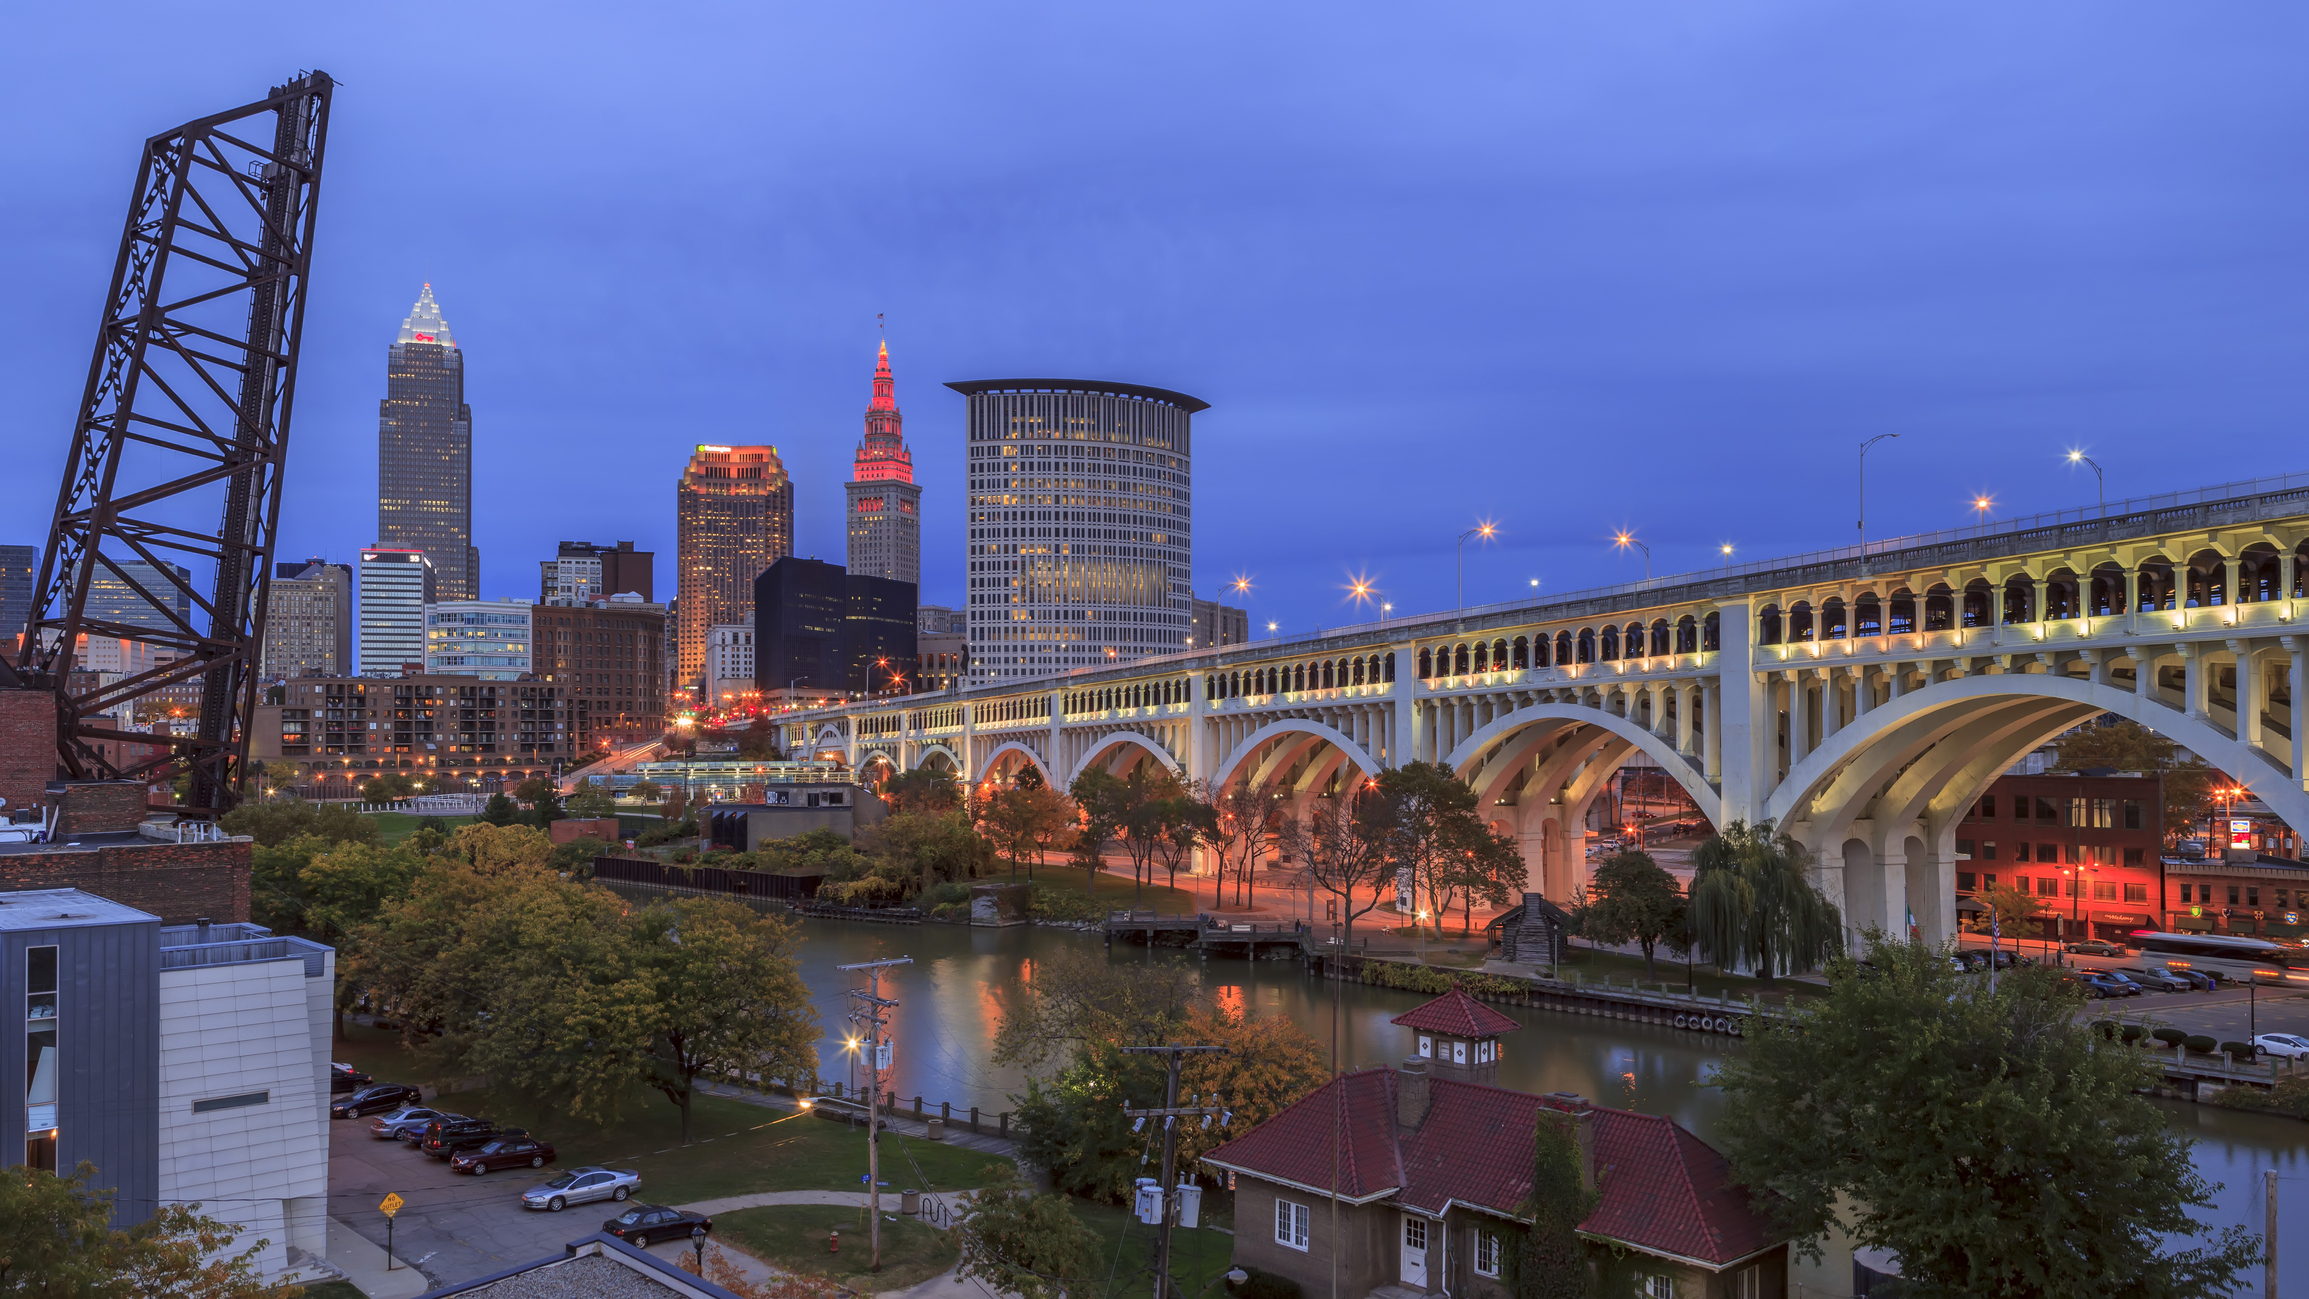 Cleveland Skyline View with Veterans Memorial Bridge in the evening lights.